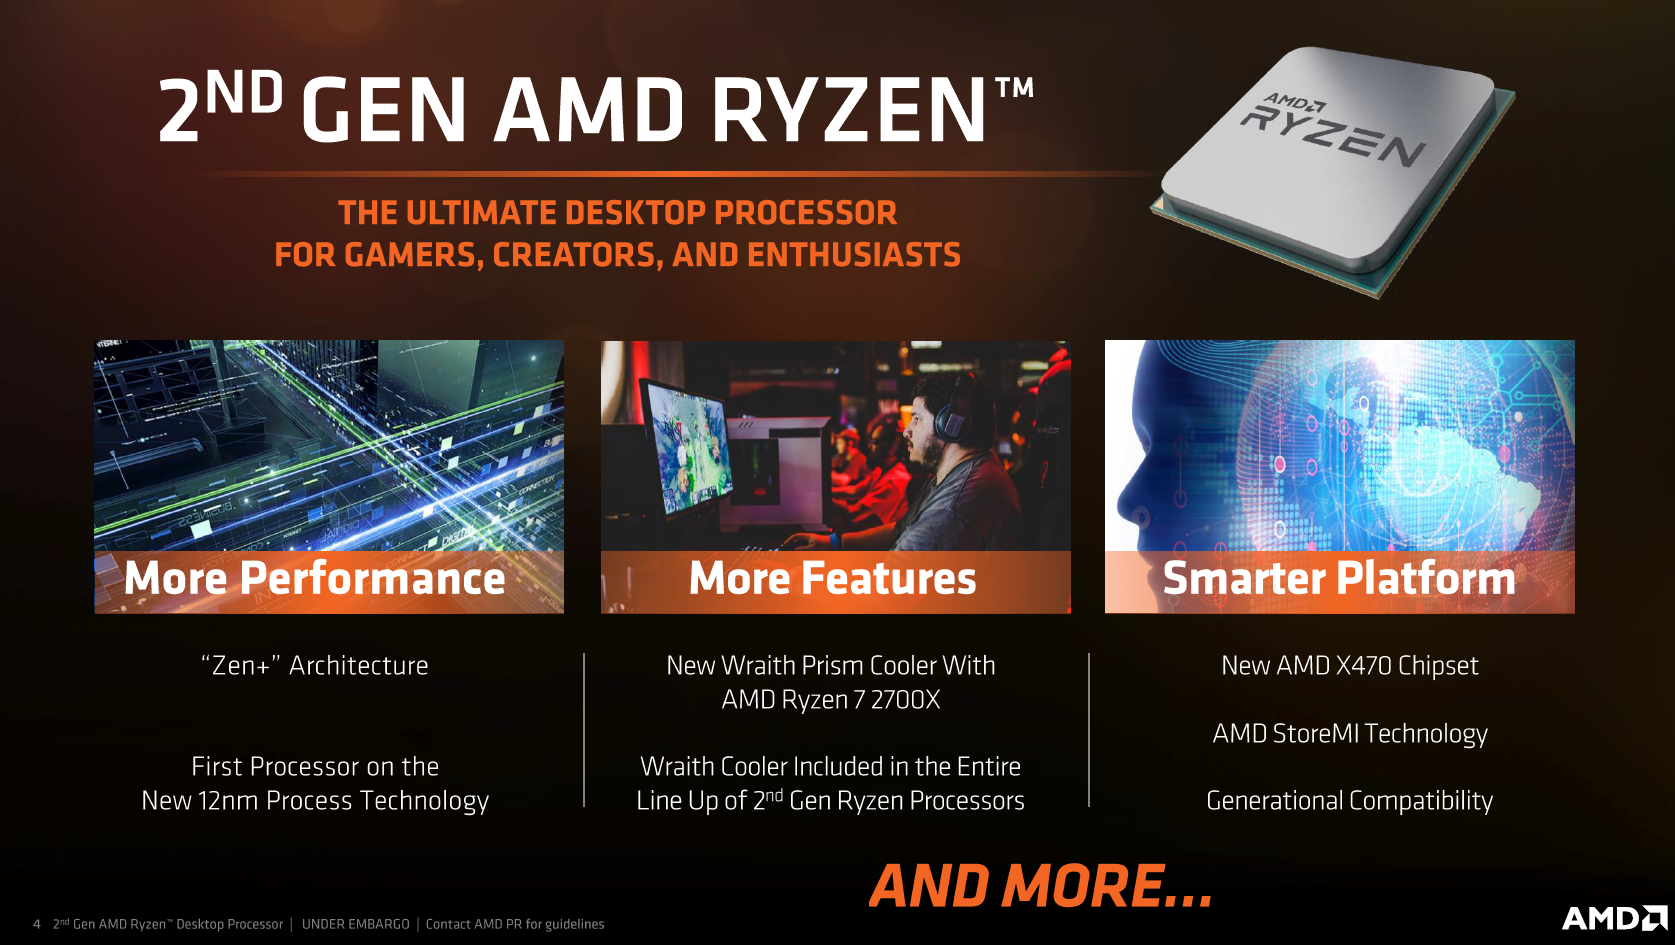 AMD Ryzen 2nd Gen Details: Four CPUs, Pre-Order Today, Reviews on